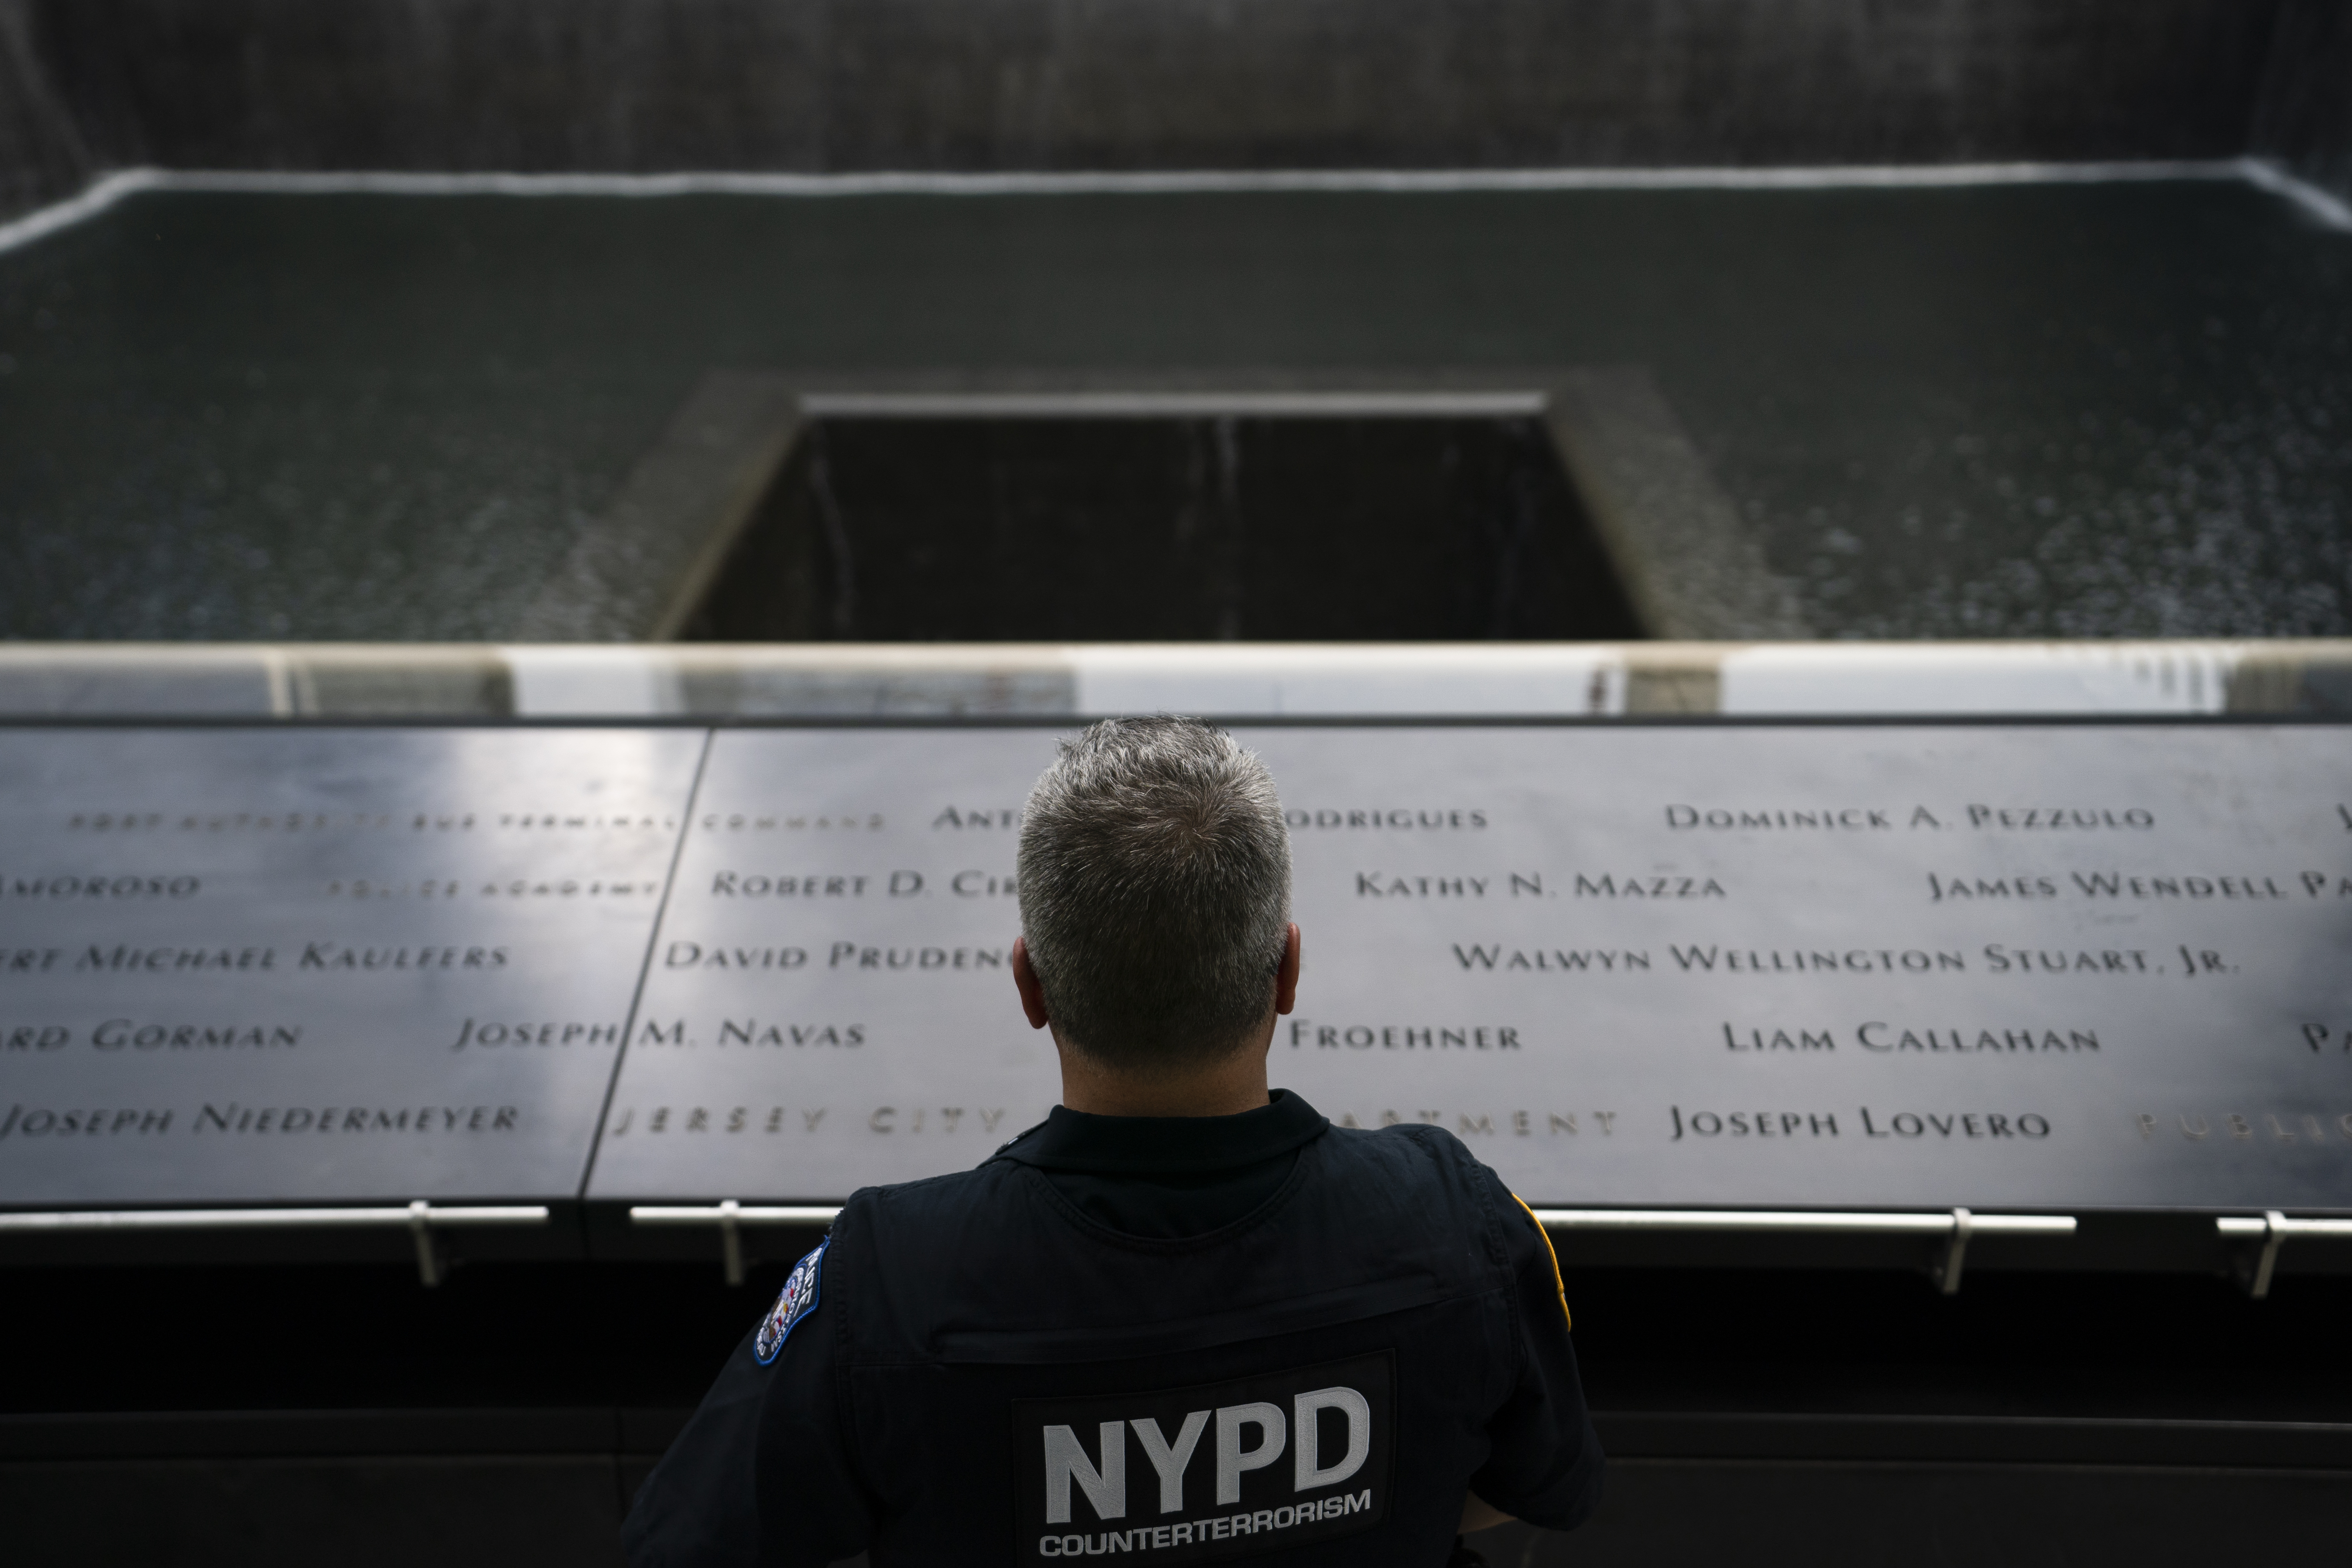 Ground zero: A selfie stop for some, a cemetery for others